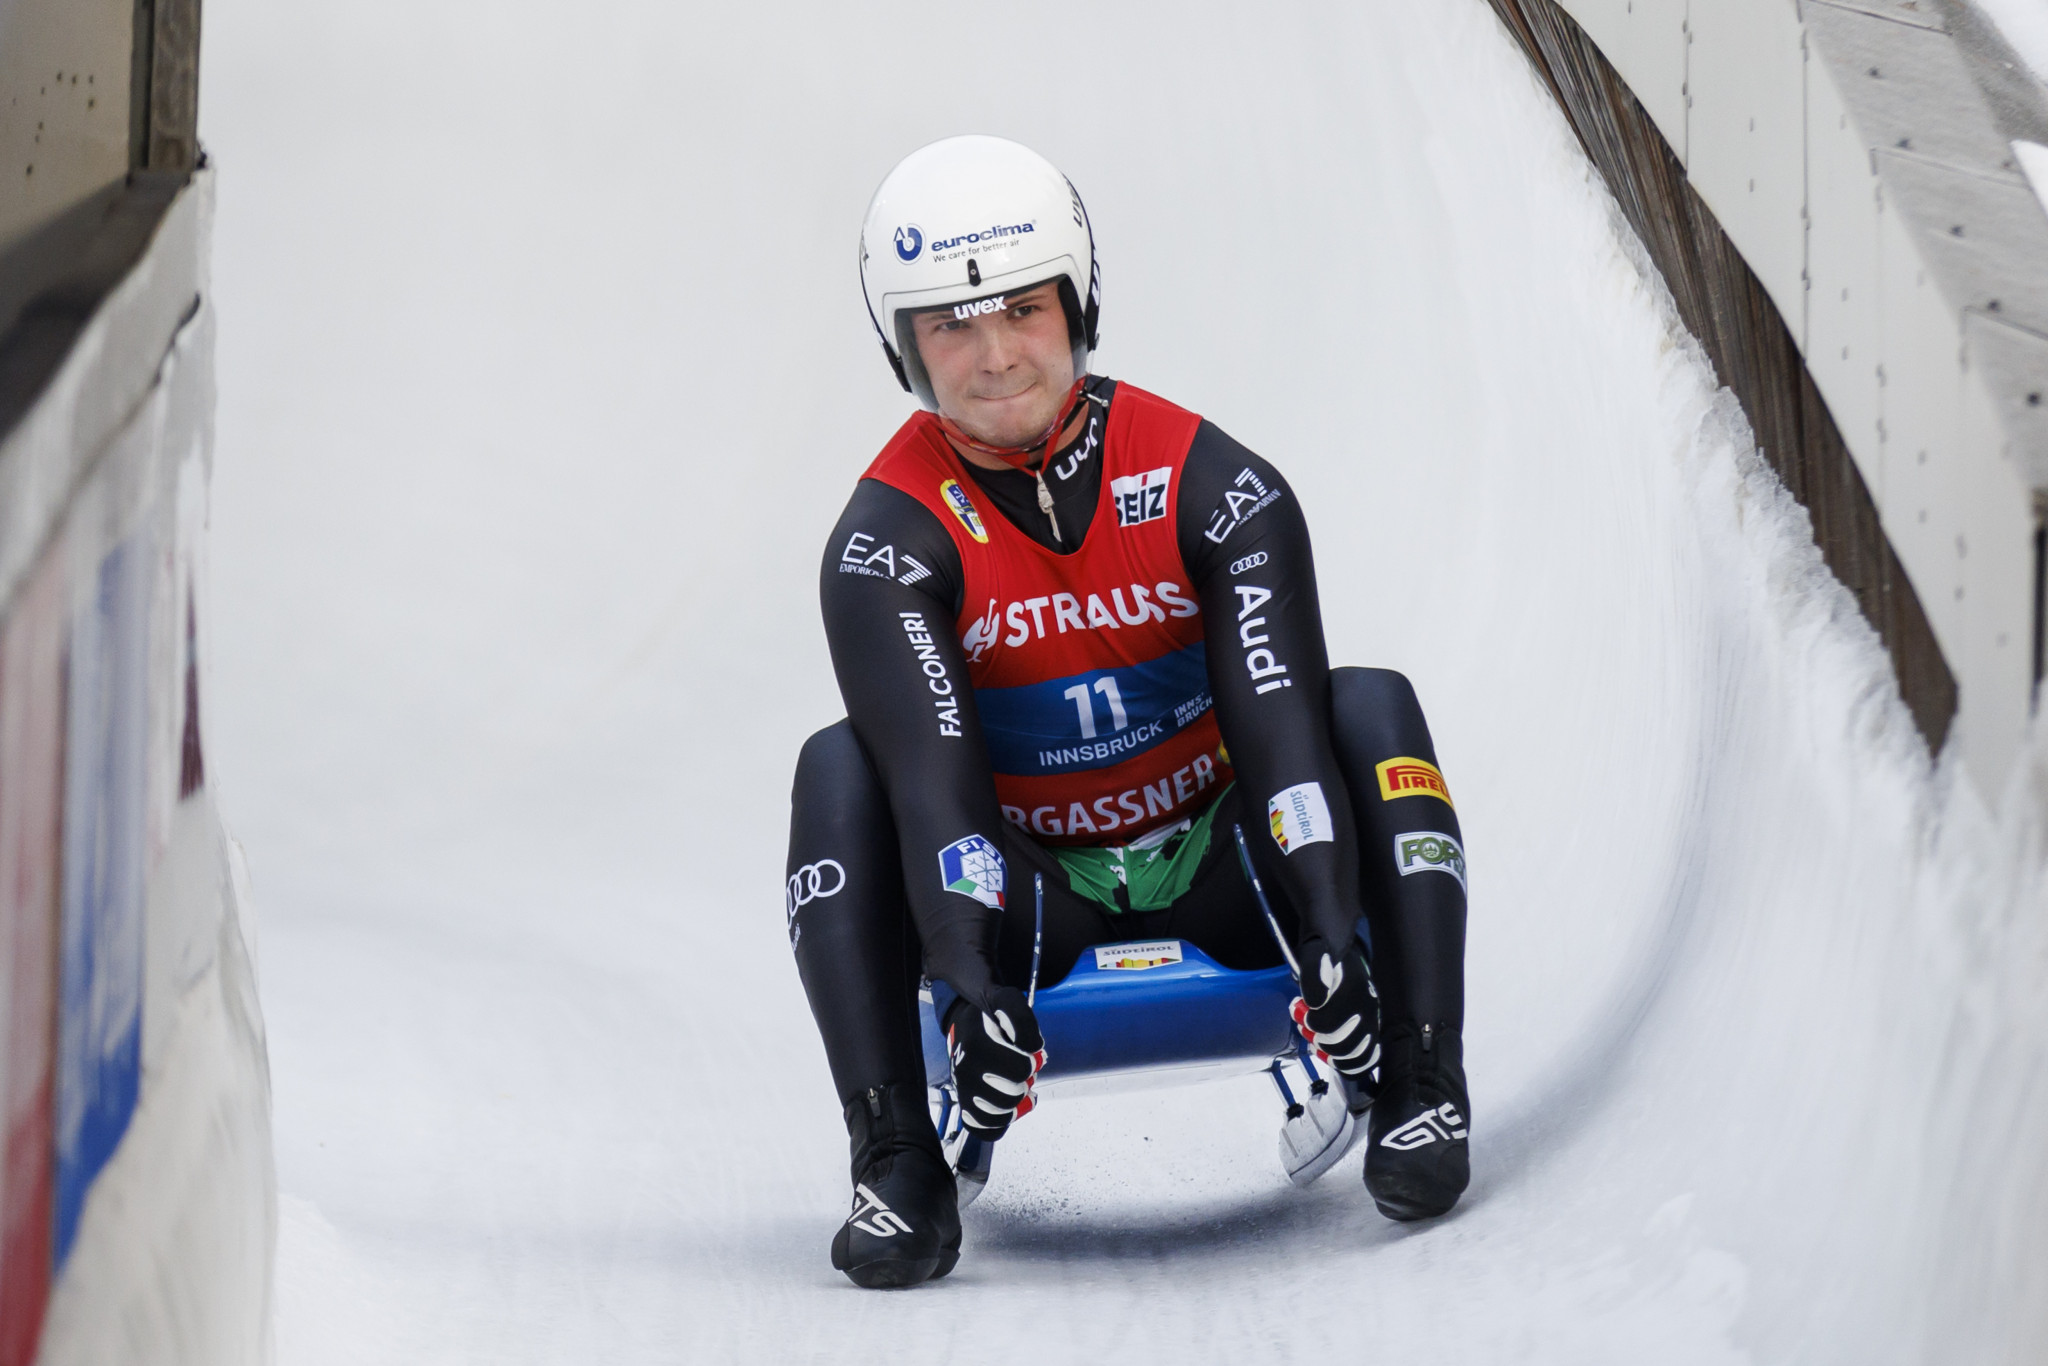 Fischnaller wins first Luge World Cup gold medal of season in Park City